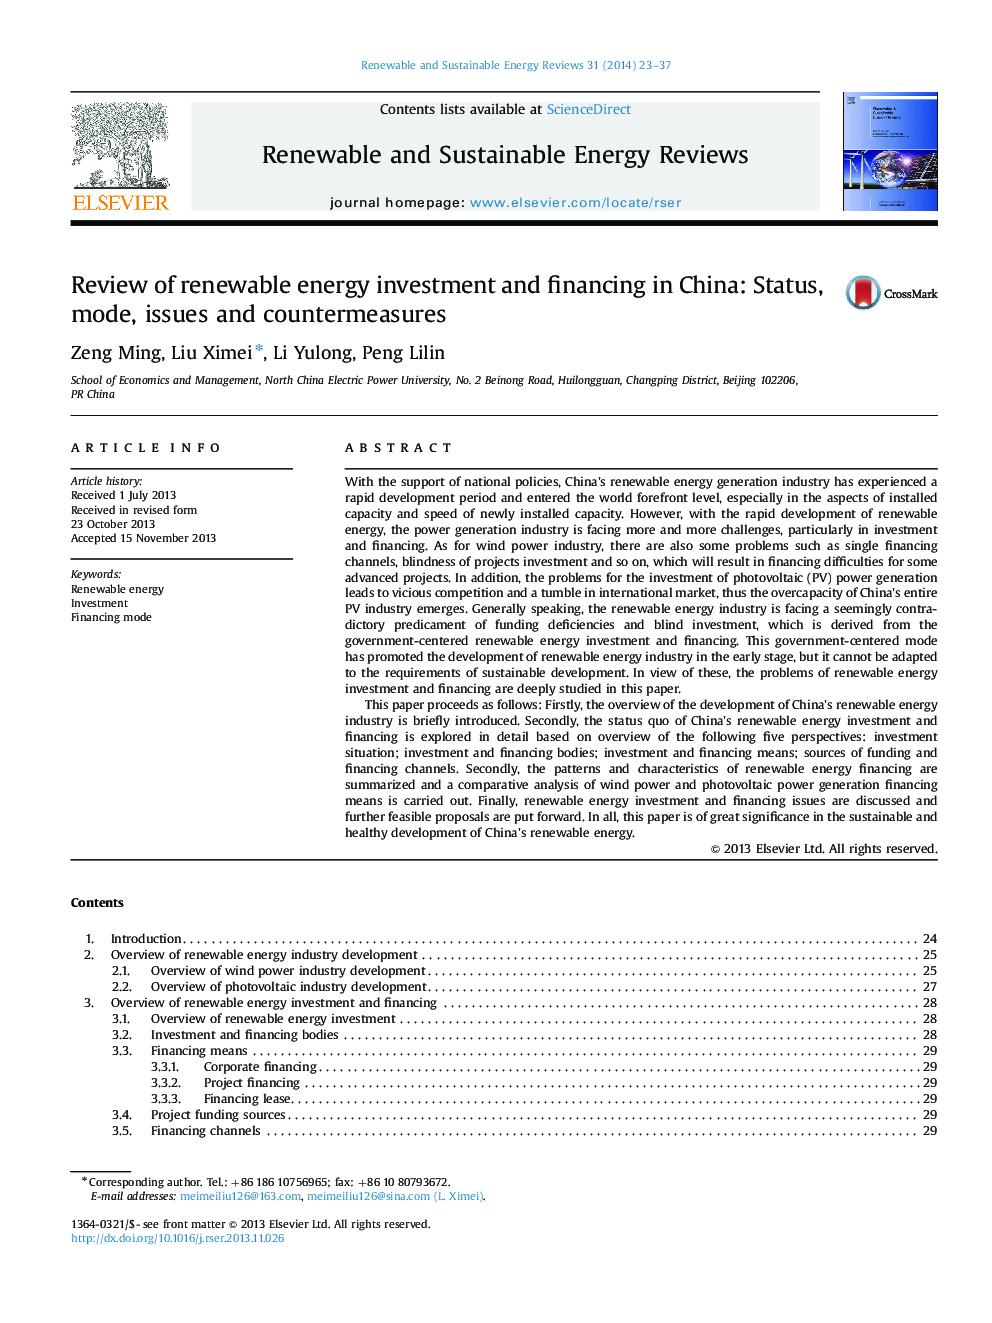 Review of renewable energy investment and financing in China: Status, mode, issues and countermeasures